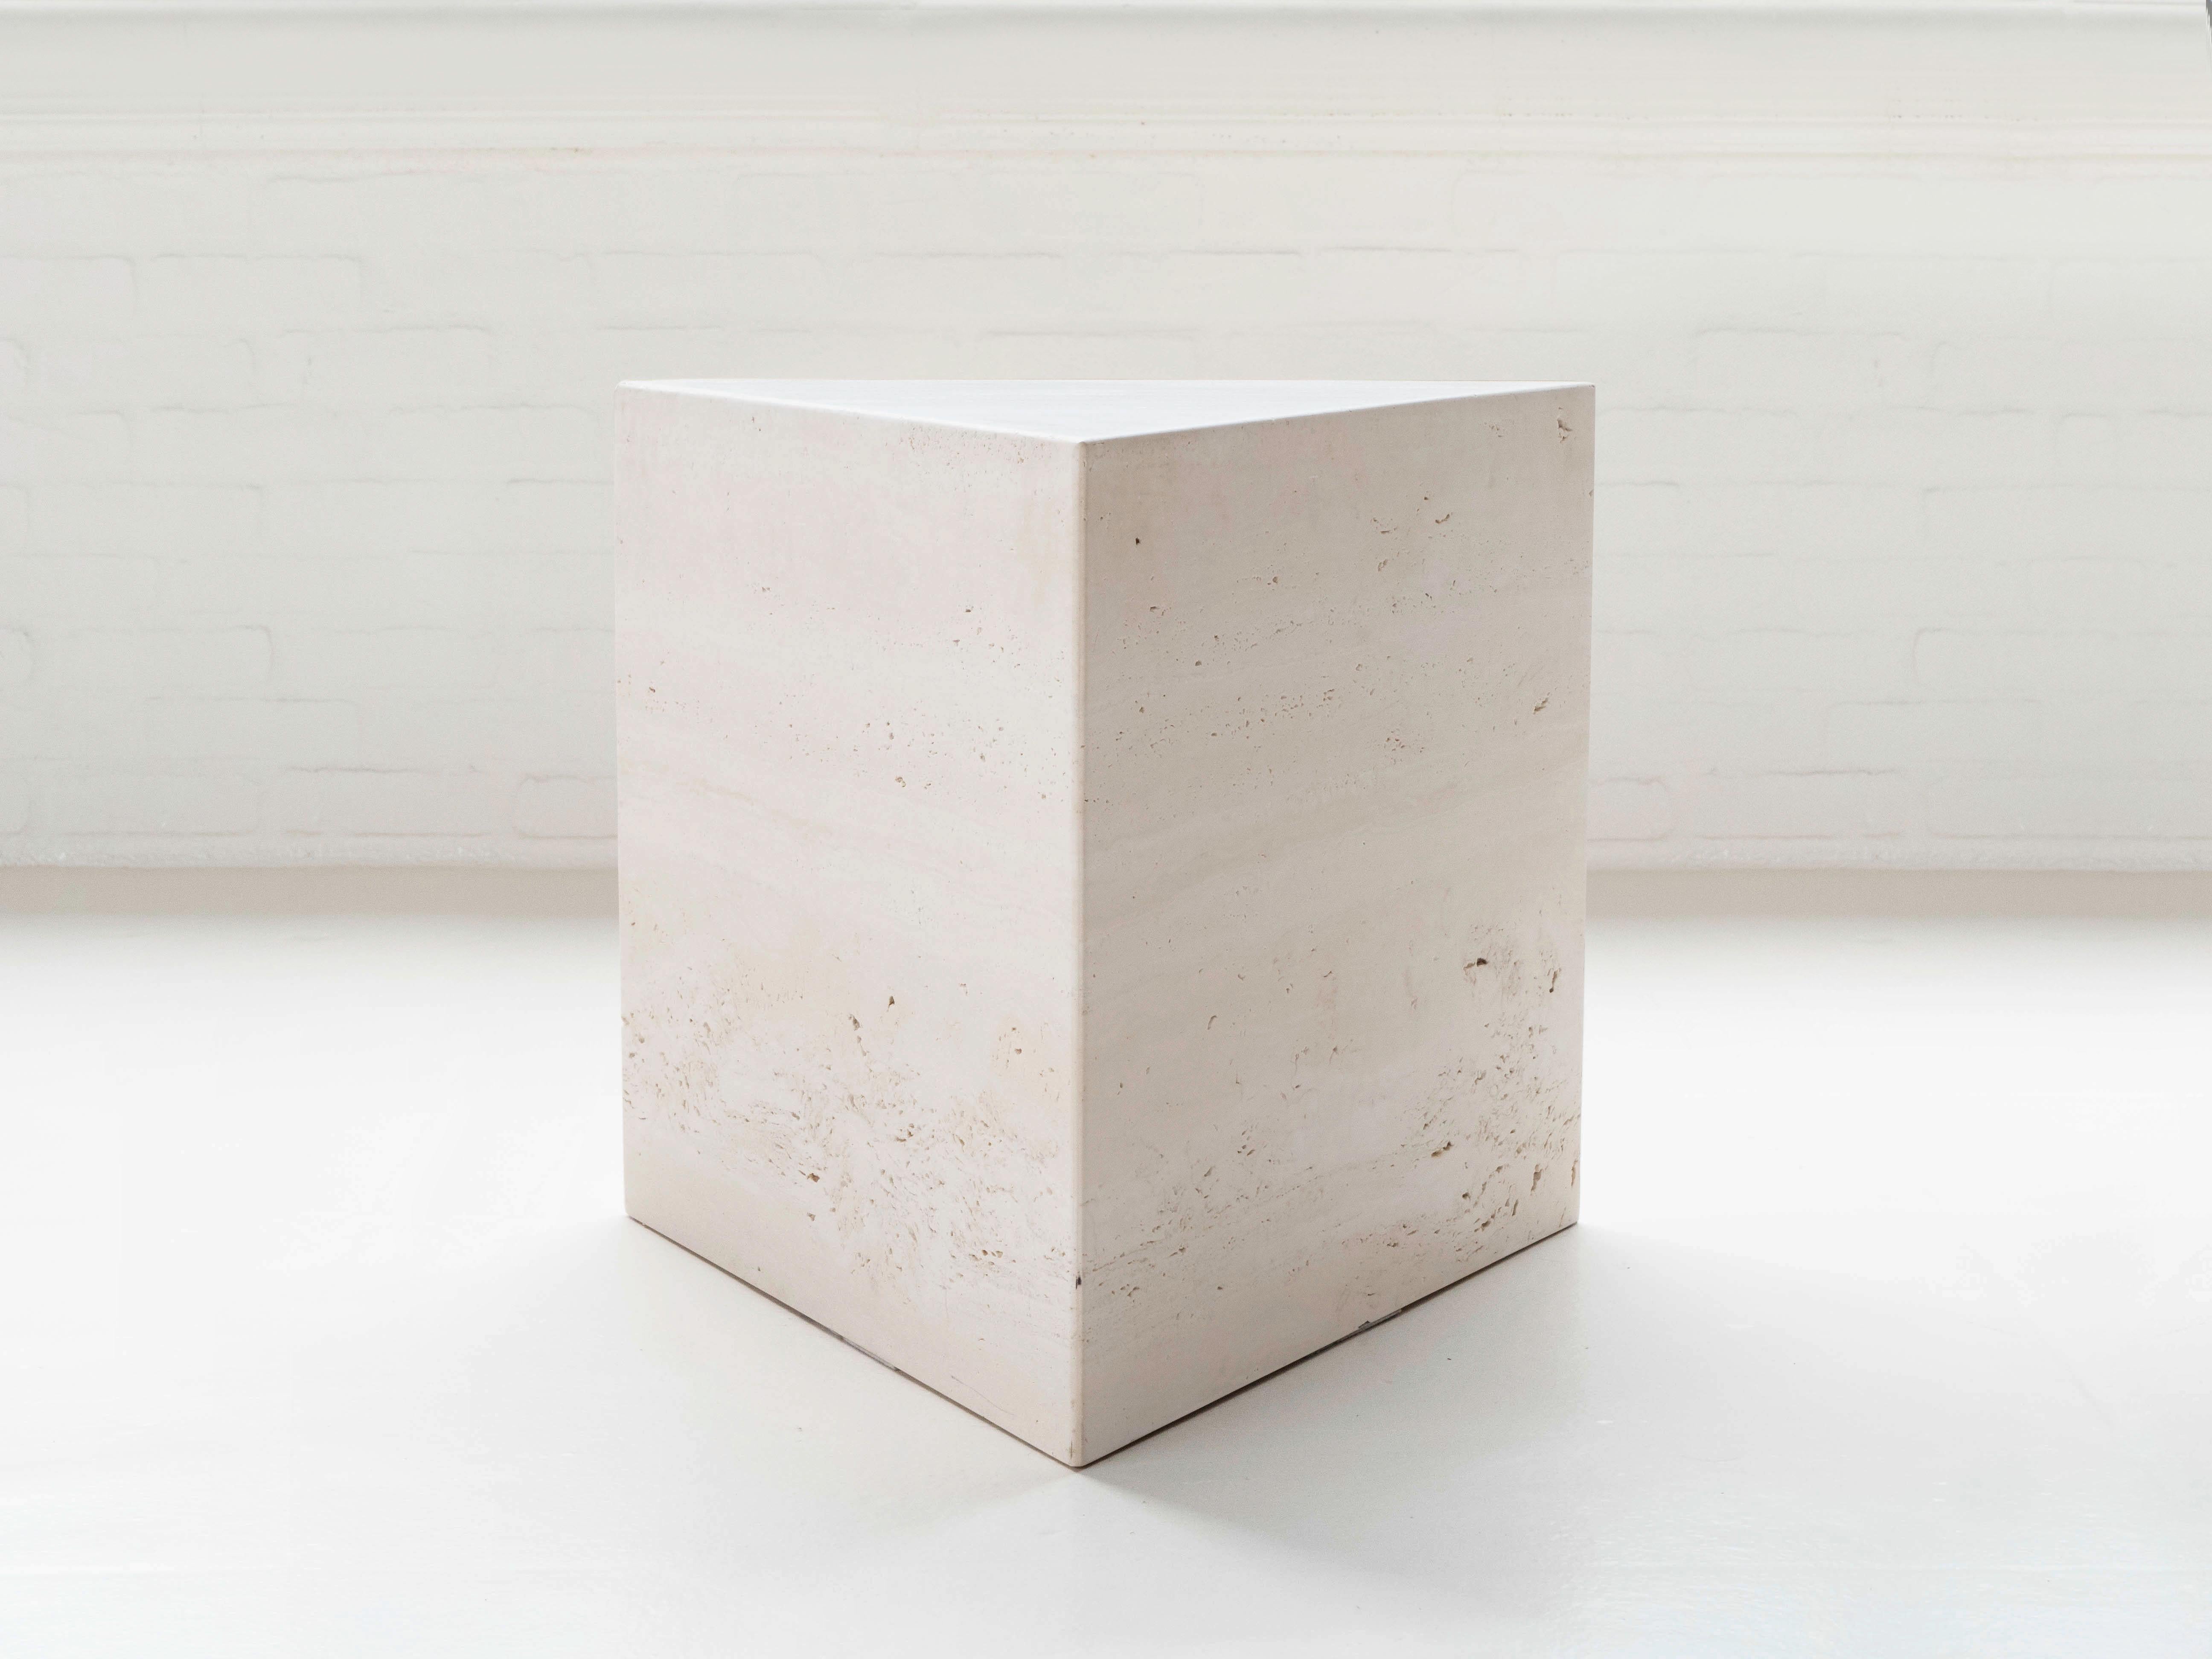 Large Solid Travertine Triangle Shaped Pedestal / Side Table, Postmodern 1970's  In Good Condition For Sale In Los Angeles, CA